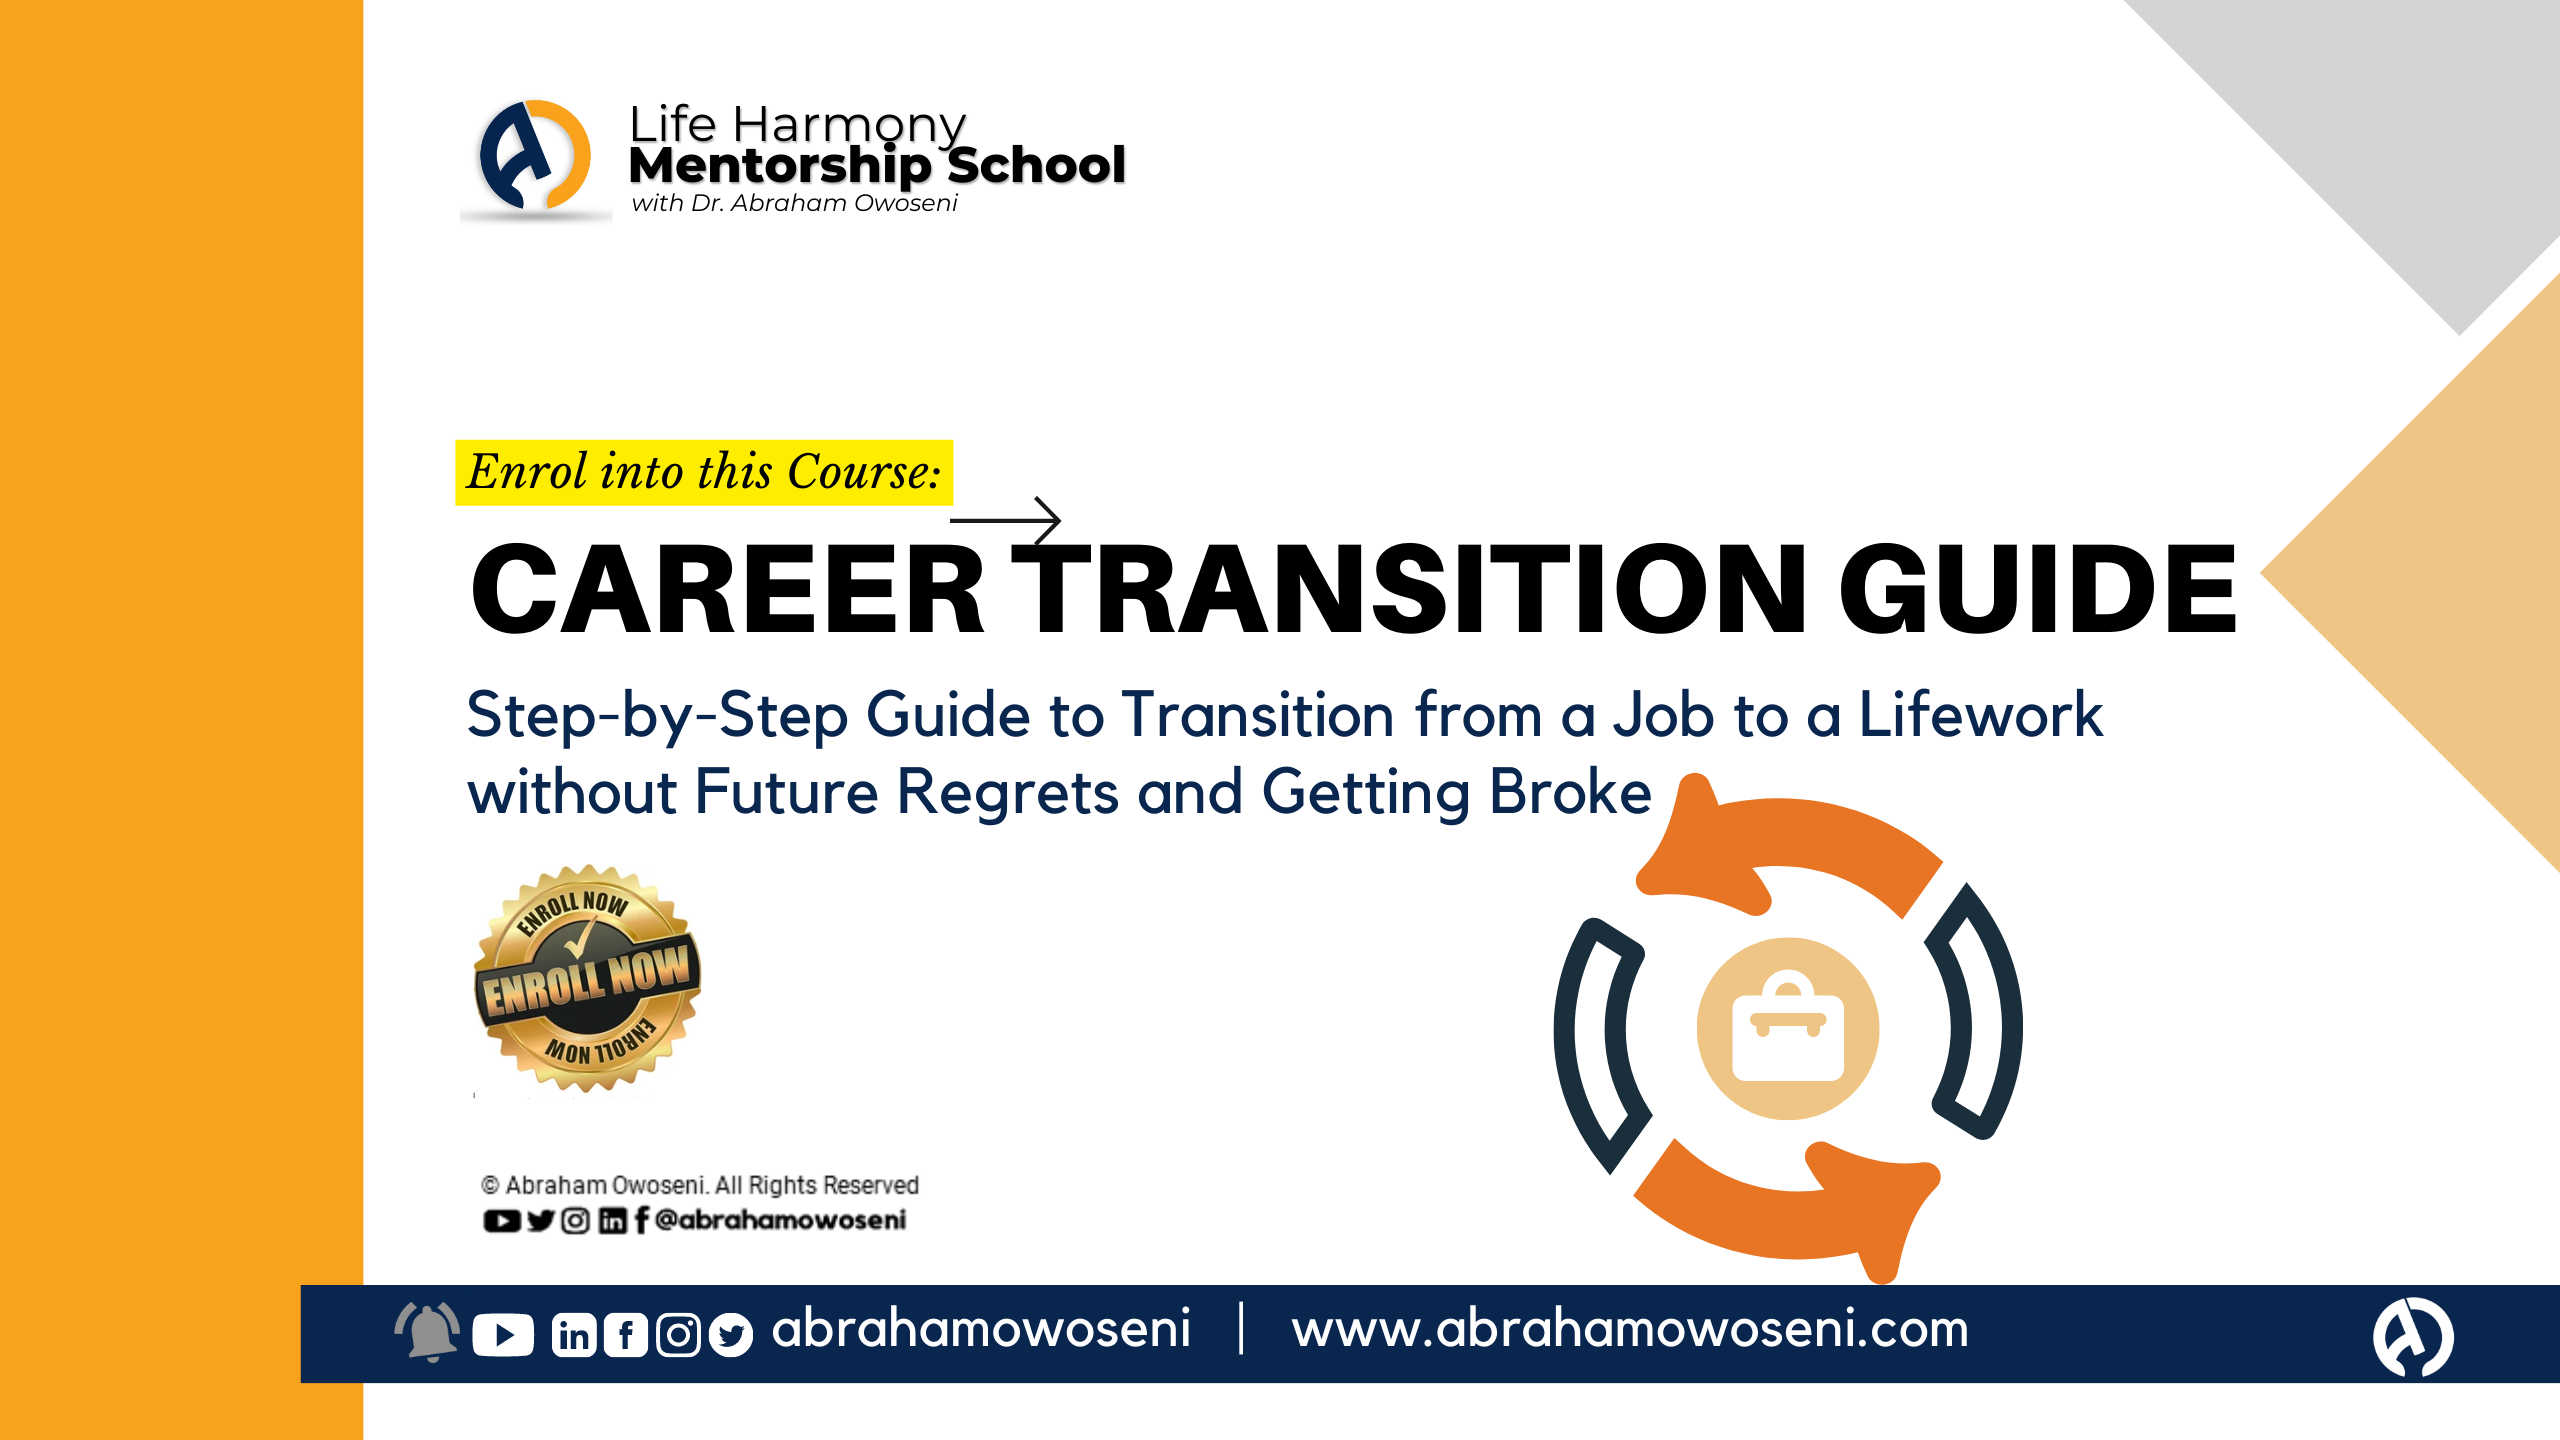 Career Transition Guide: Step-by-Step Guide to Transition from a Job to a Lifework without Regrets and Getting Broke